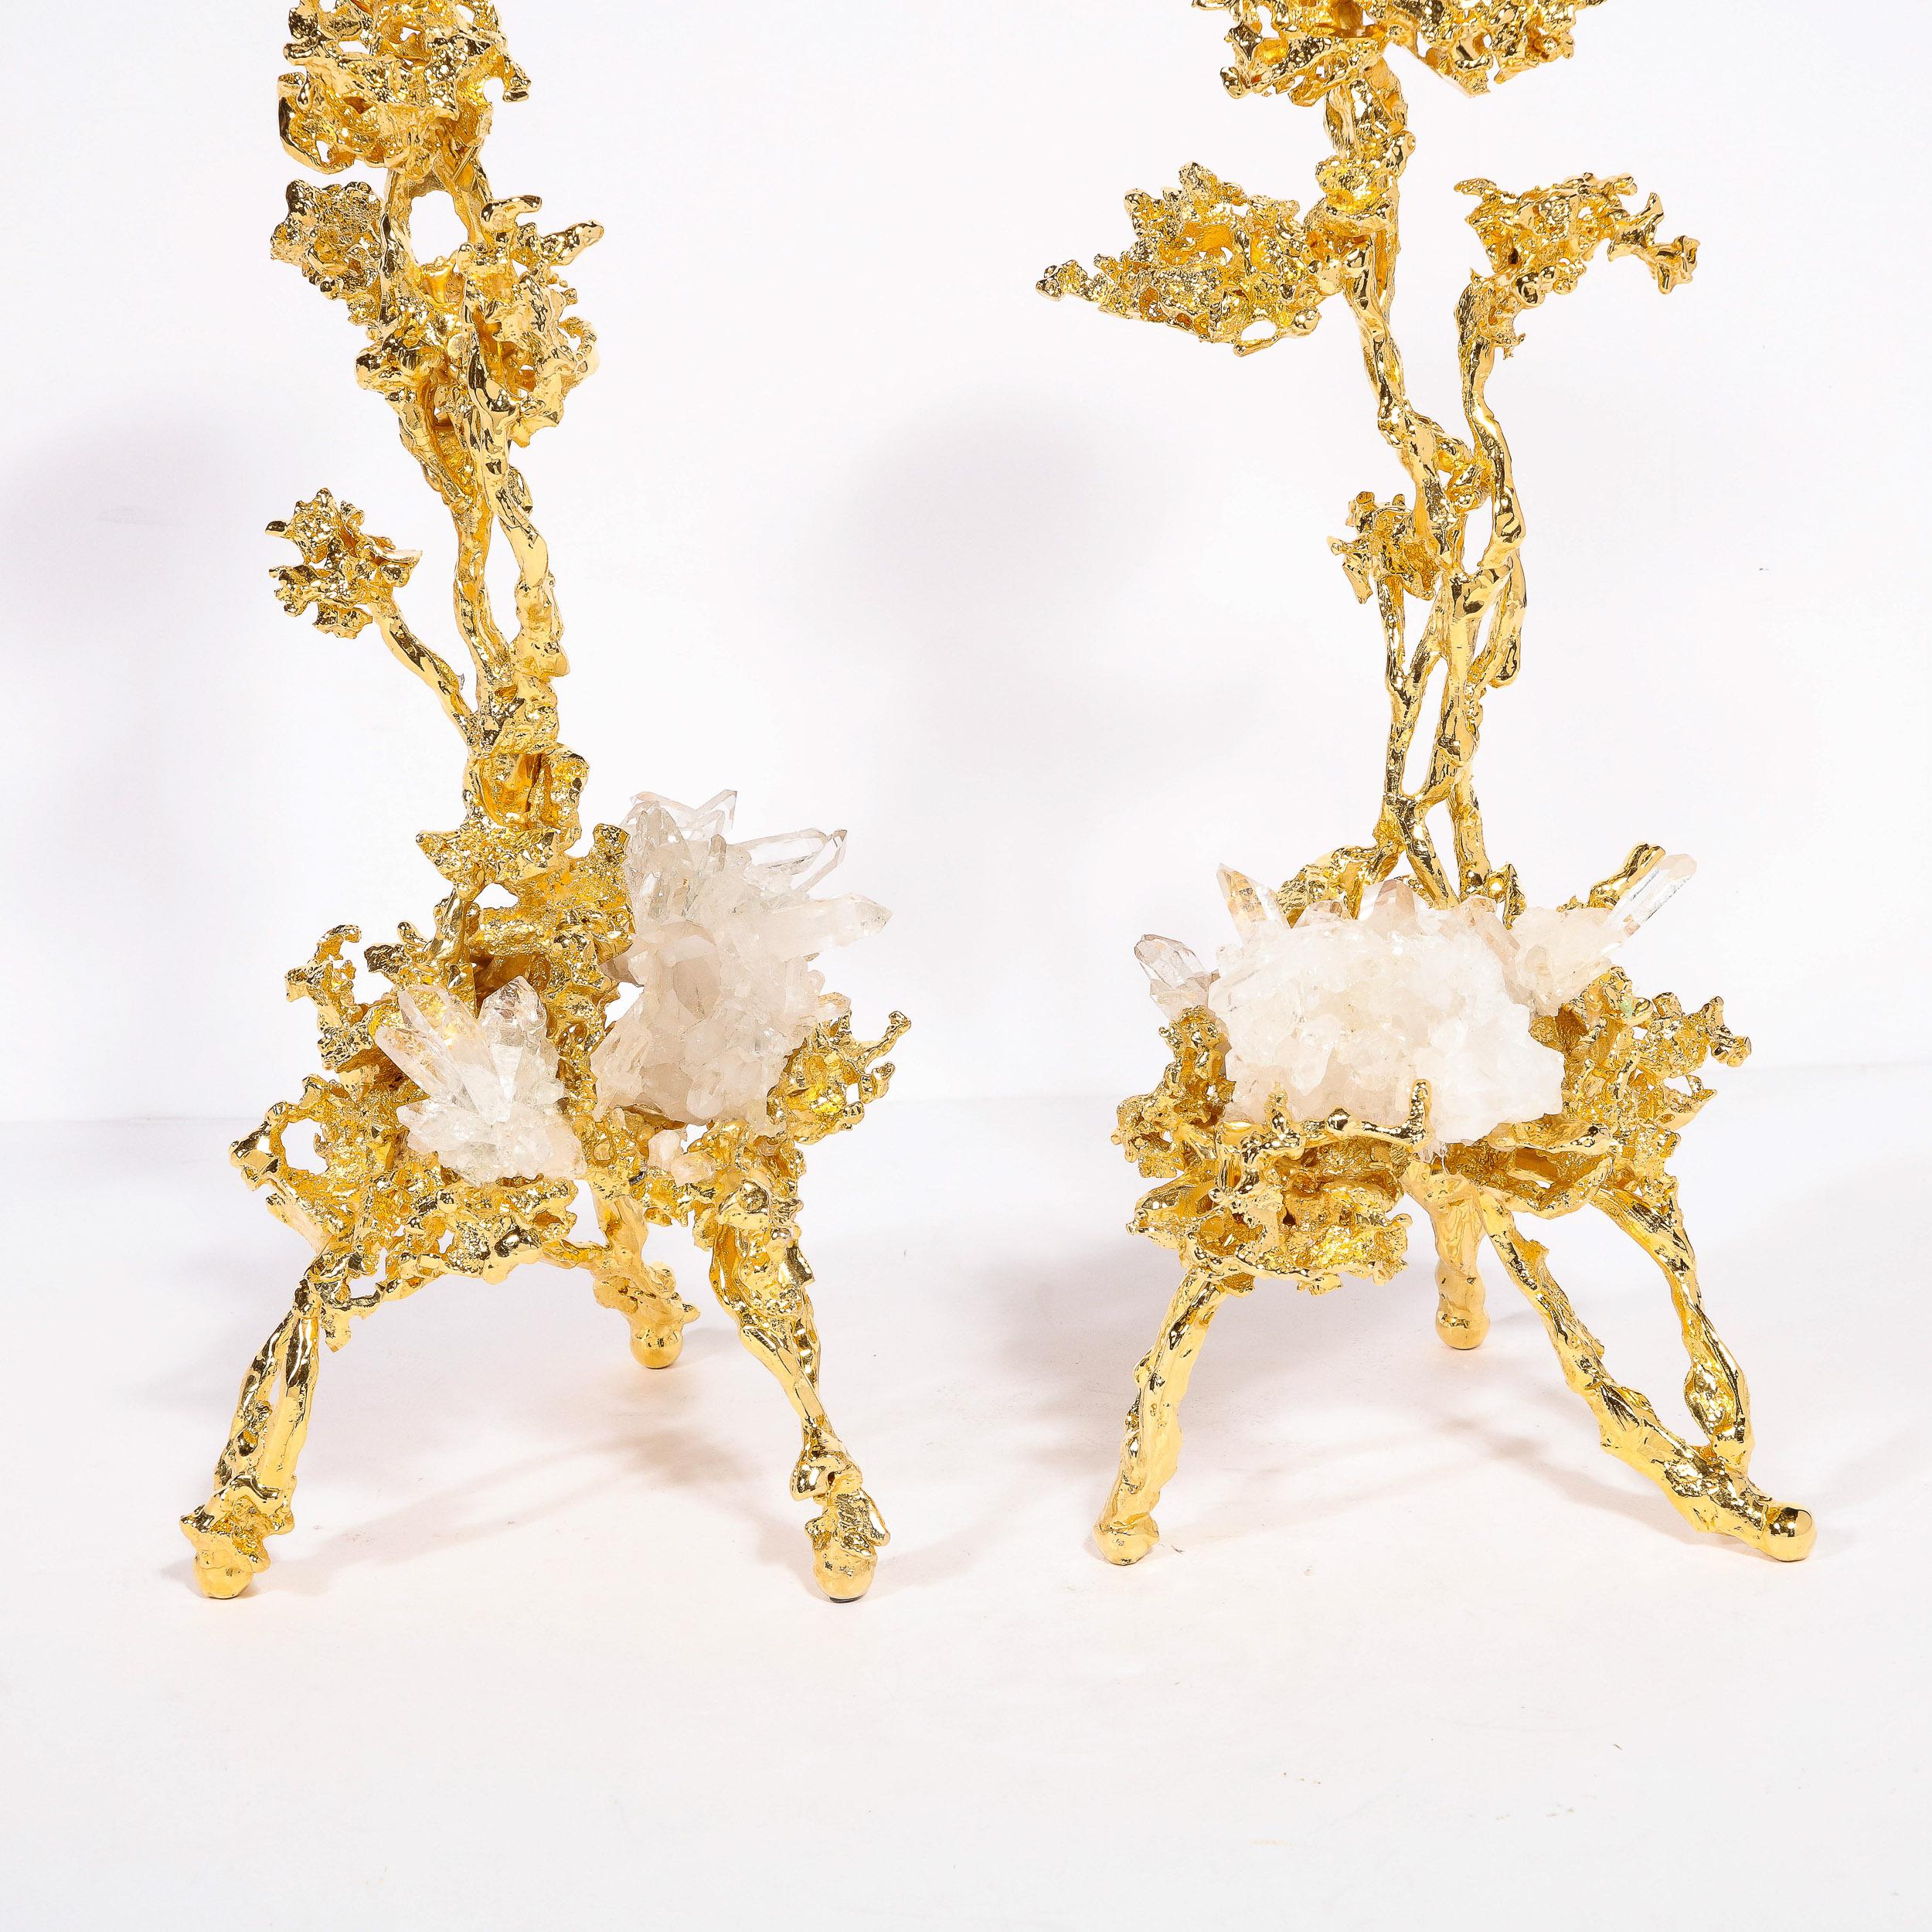 Pair of 24K Gold Single Branch Candleholders w/ Rock Crystals by Claude Boeltz For Sale 2